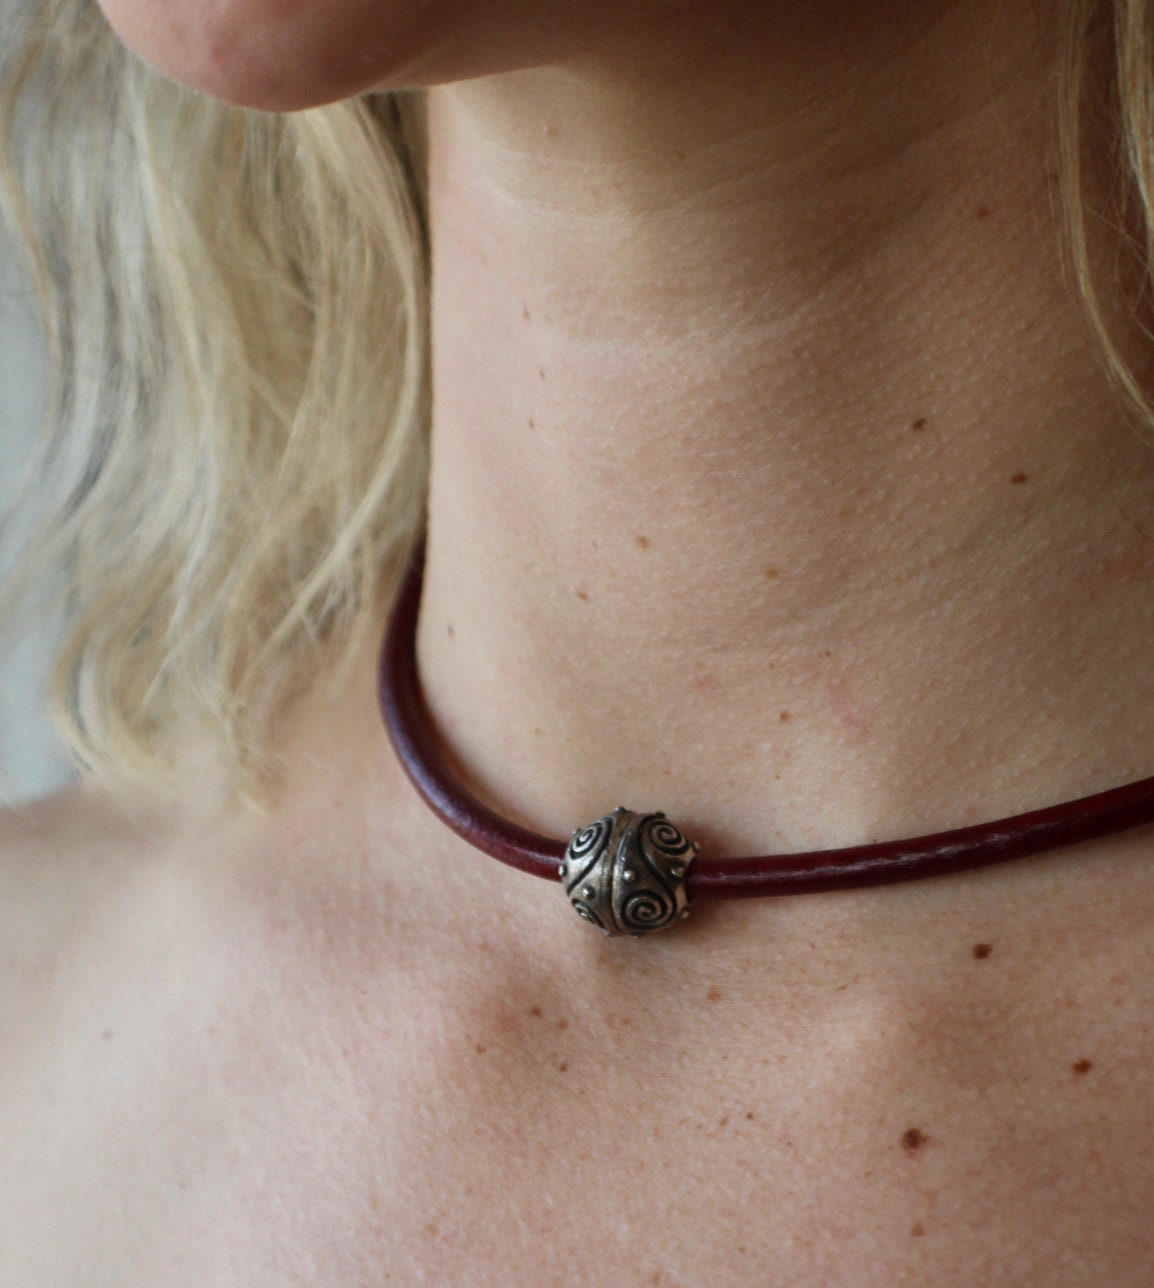 Leather Necklace. Gorgeous red Italian leather choker necklace fashioned with a center silver ornate magnetic clasp.